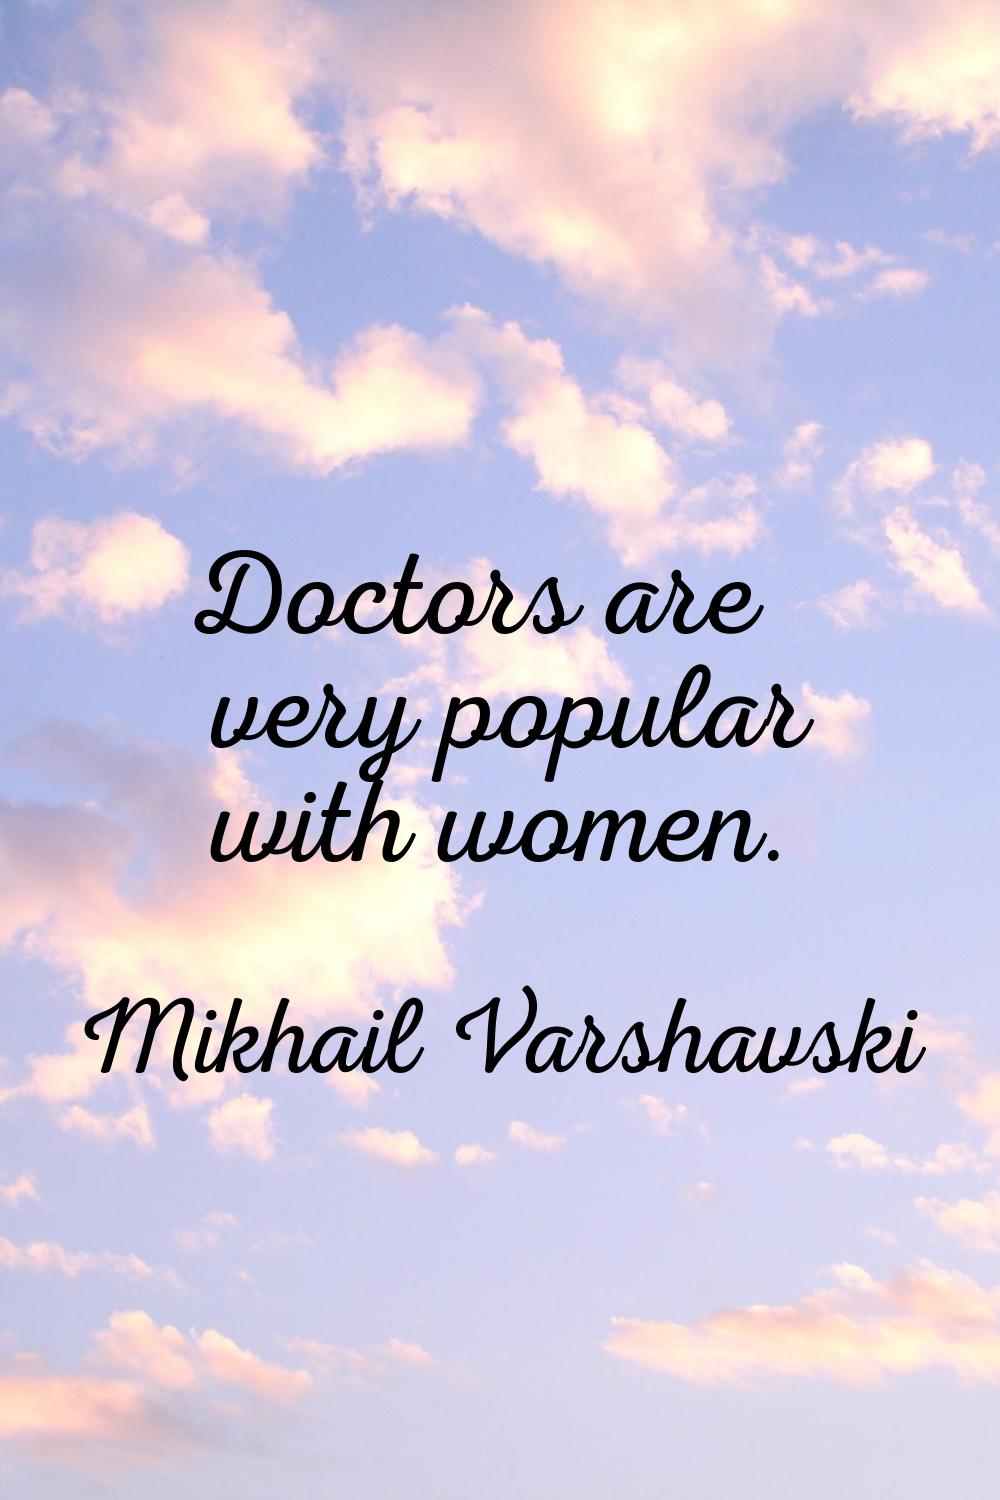 Doctors are very popular with women.